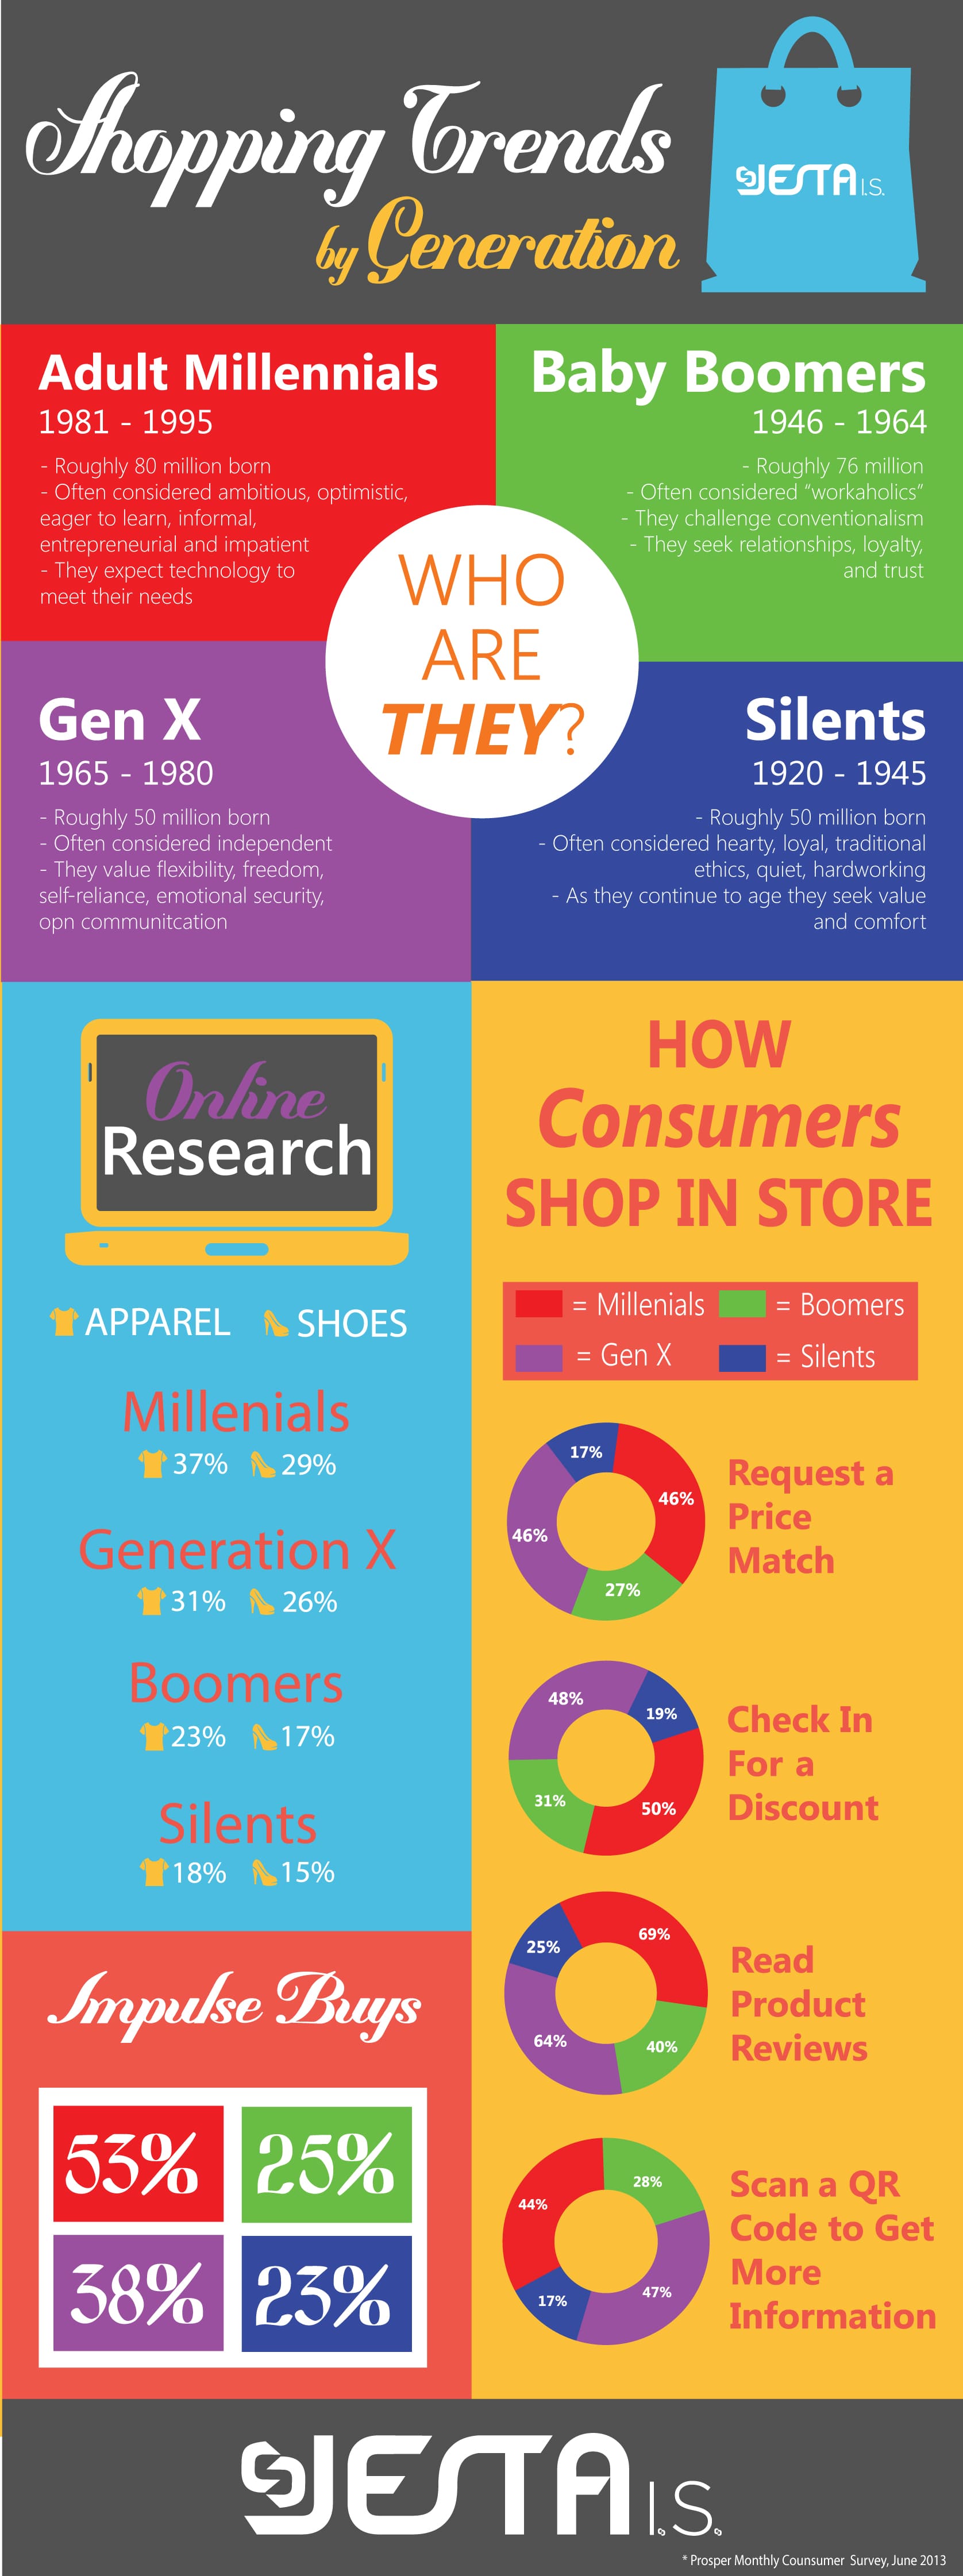 Shopping-Trends-by-Generation-Infographic